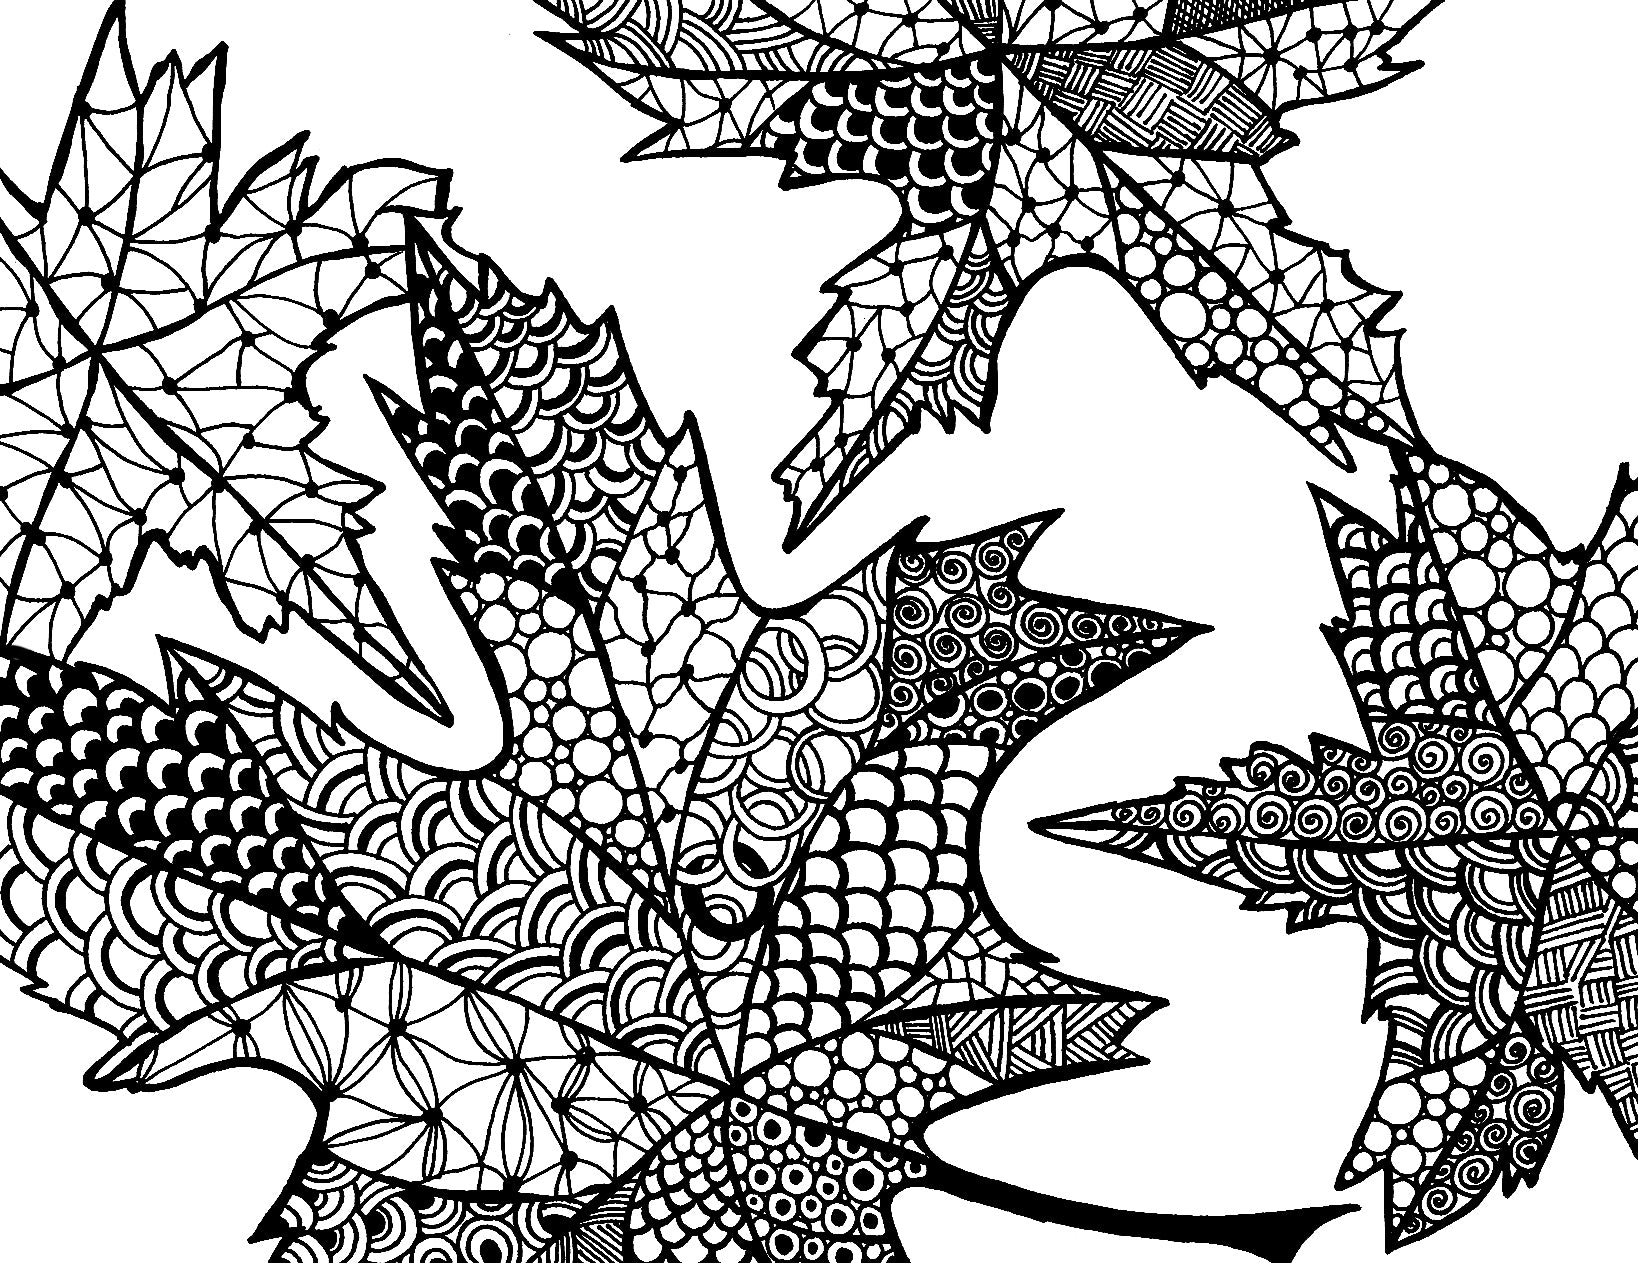 Free downloadable coloring page featuring a cluster of intricately patterned maple leaves, each leaf uniquely adorned with a variety of textures such as spirals, lacework, scales, and geometric shapes. This artistic take on the iconic symbol invites creativity and relaxation, ideal for anyone seeking a moment of calm through coloring. Free coloring page :: You-Color